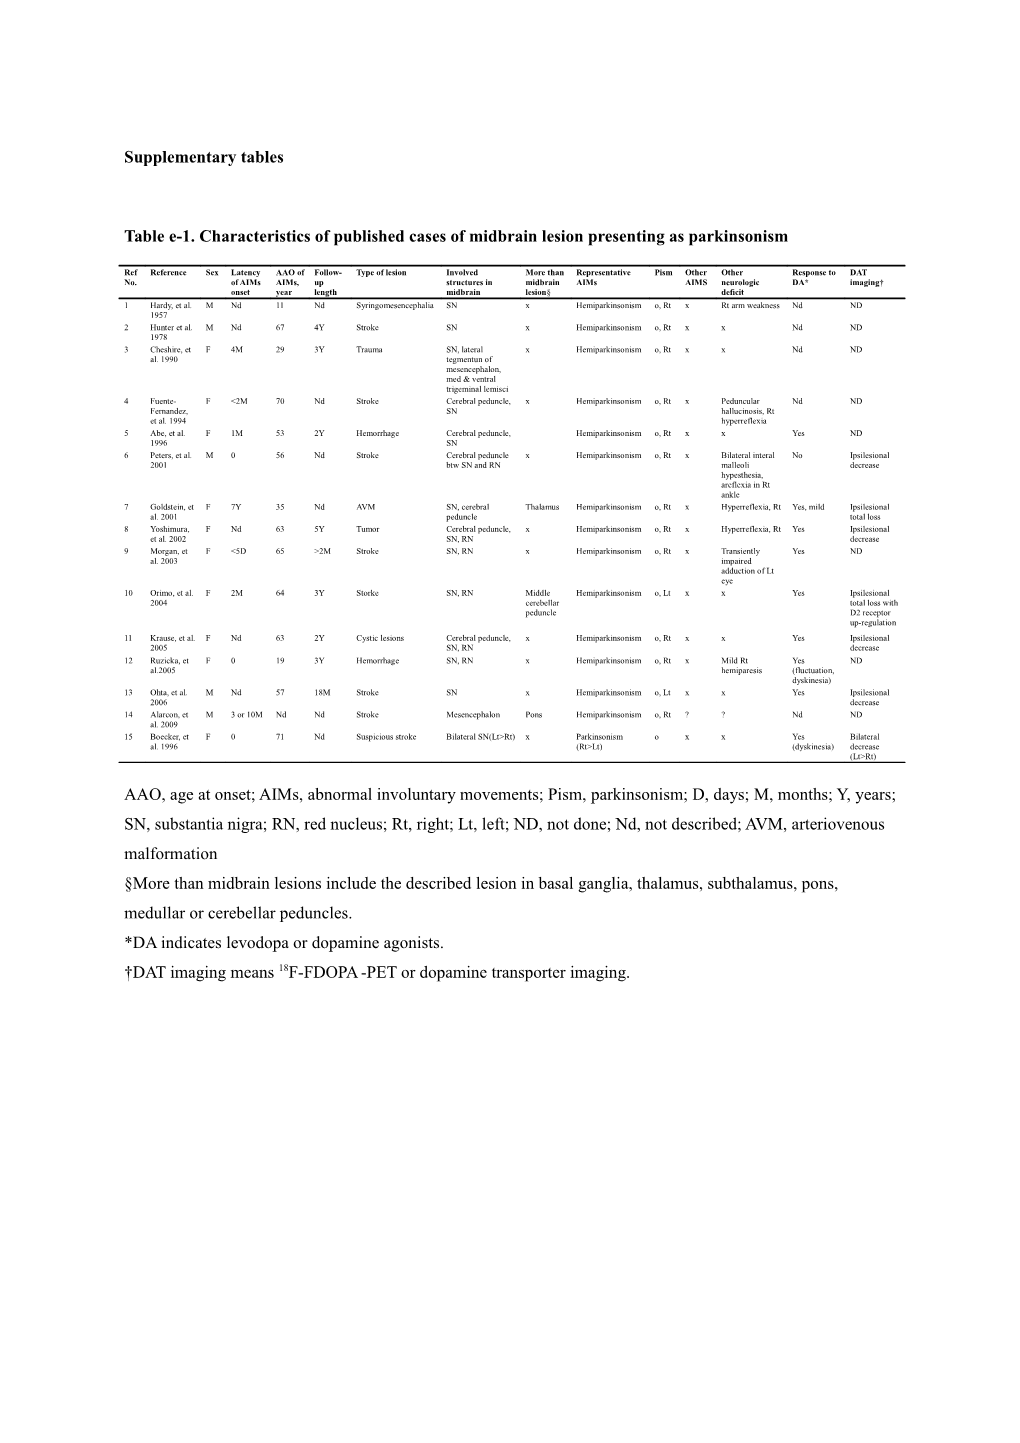 Table E-1. Characteristics of Published Cases of Midbrain Lesion Presenting As Parkinsonism